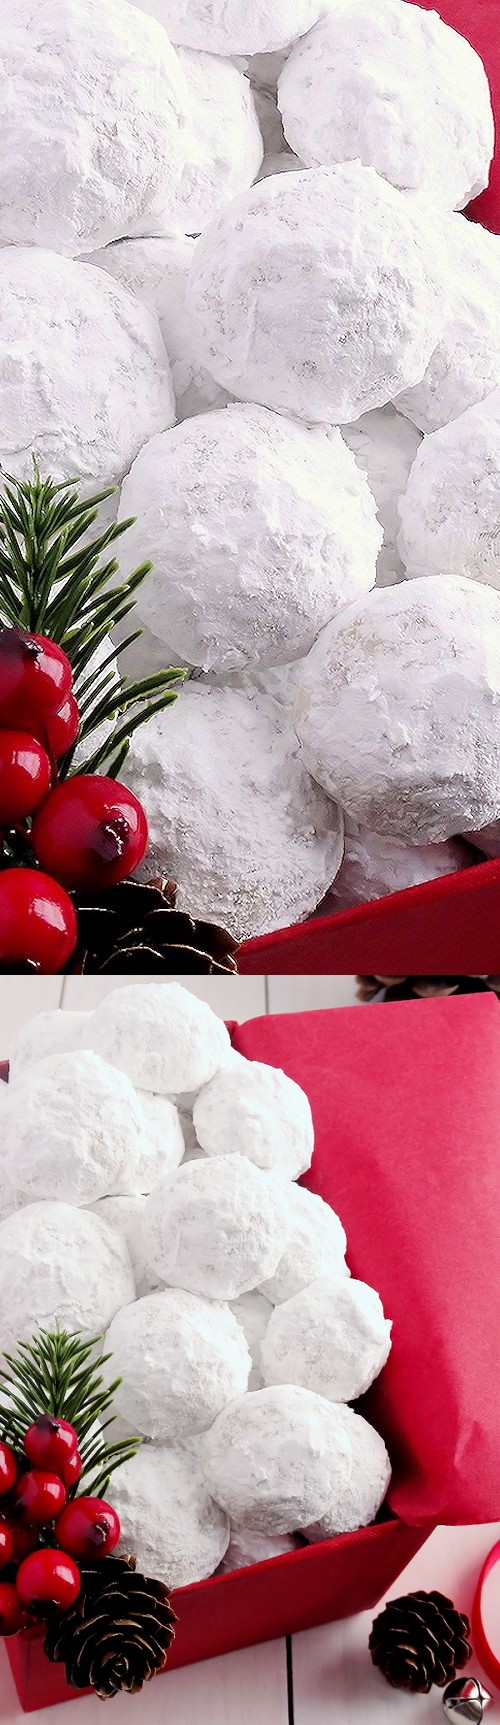 Snowball Christmas Cookies (best ever